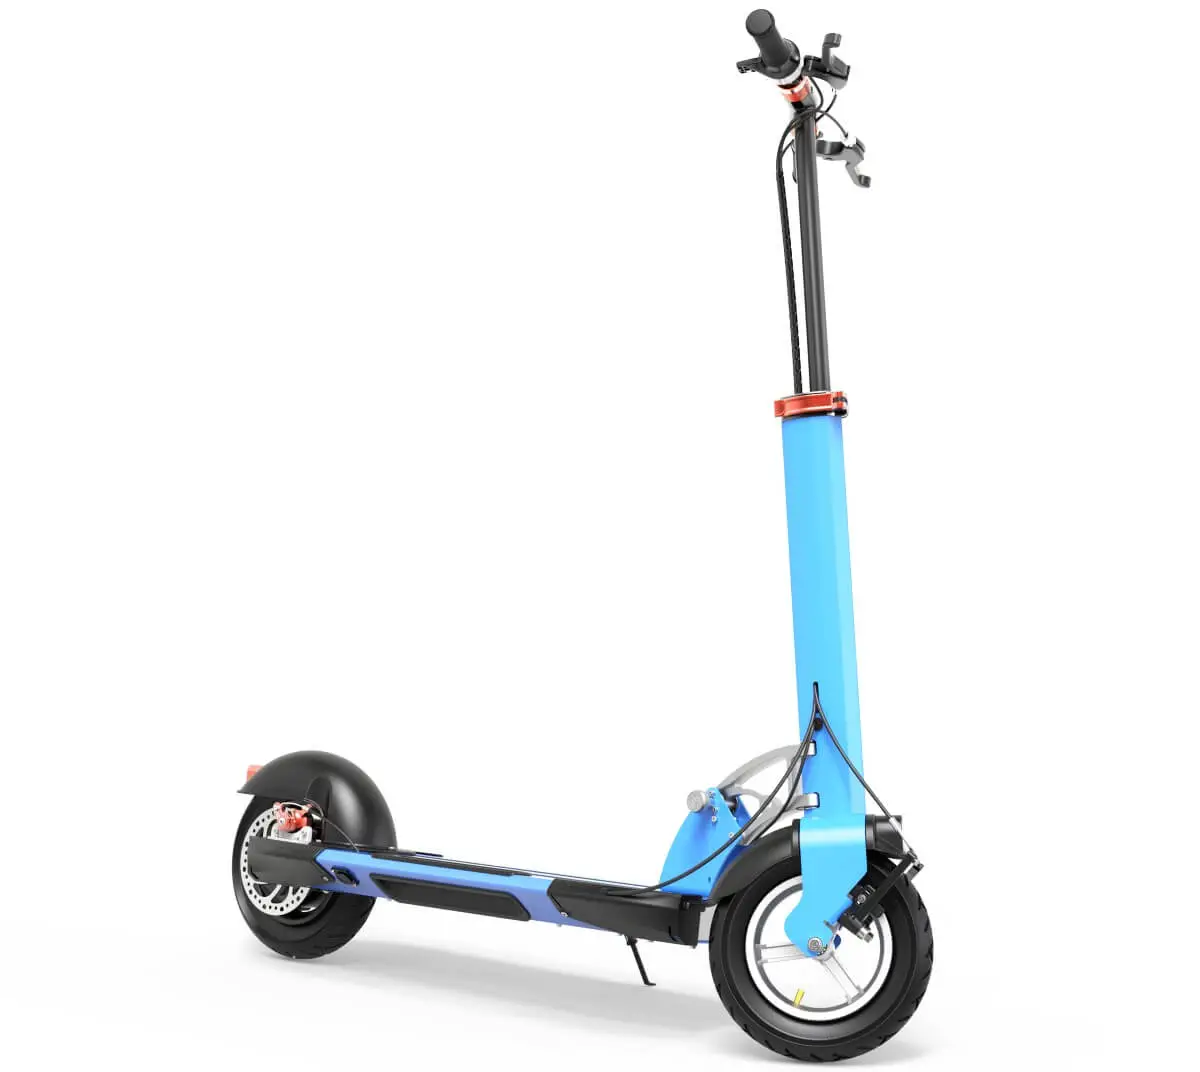 Inokim Ox Electric Scooter Review